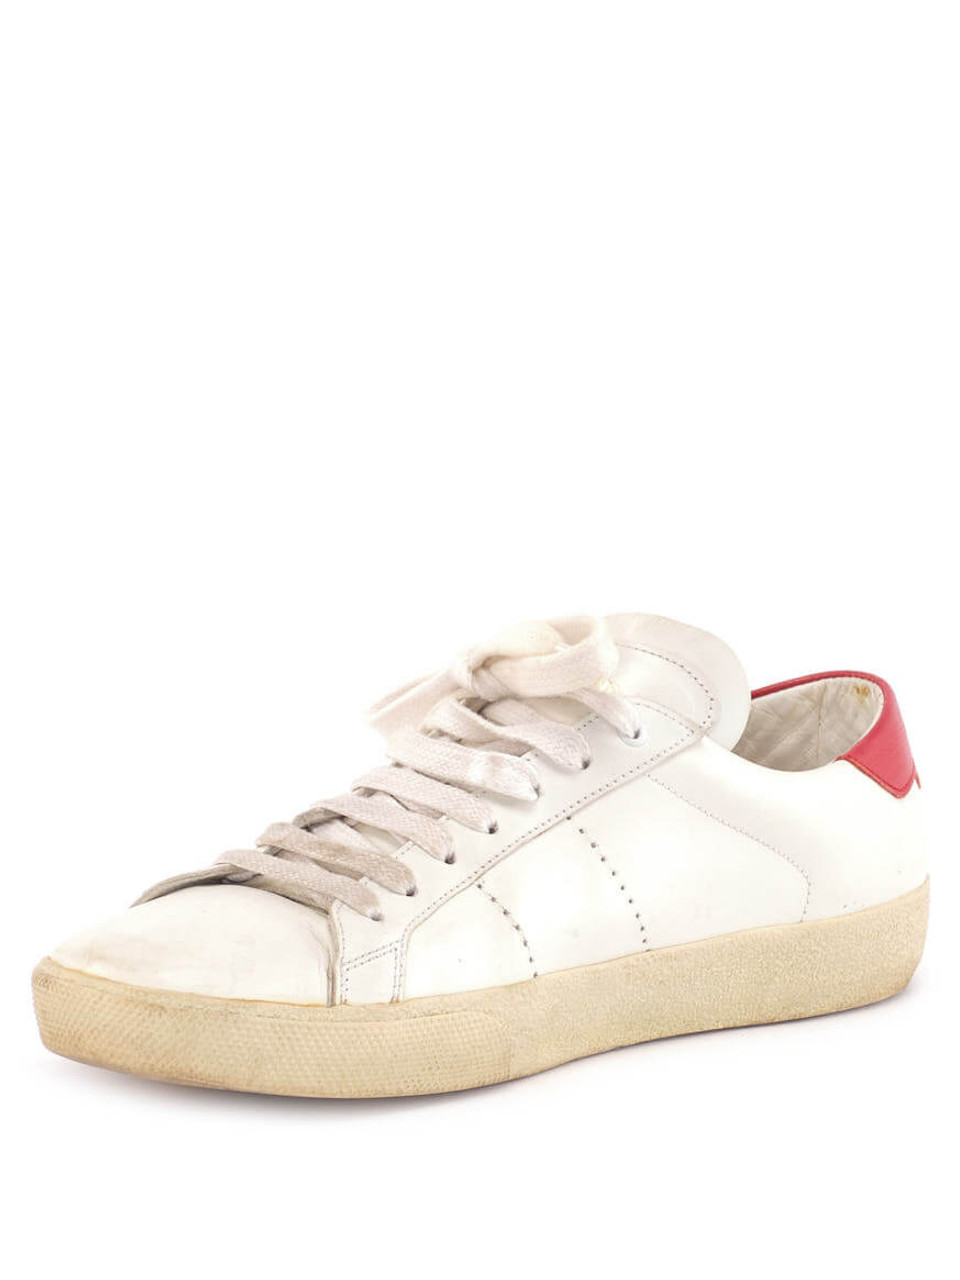 Saint Laurent White Leather Court Sneakers